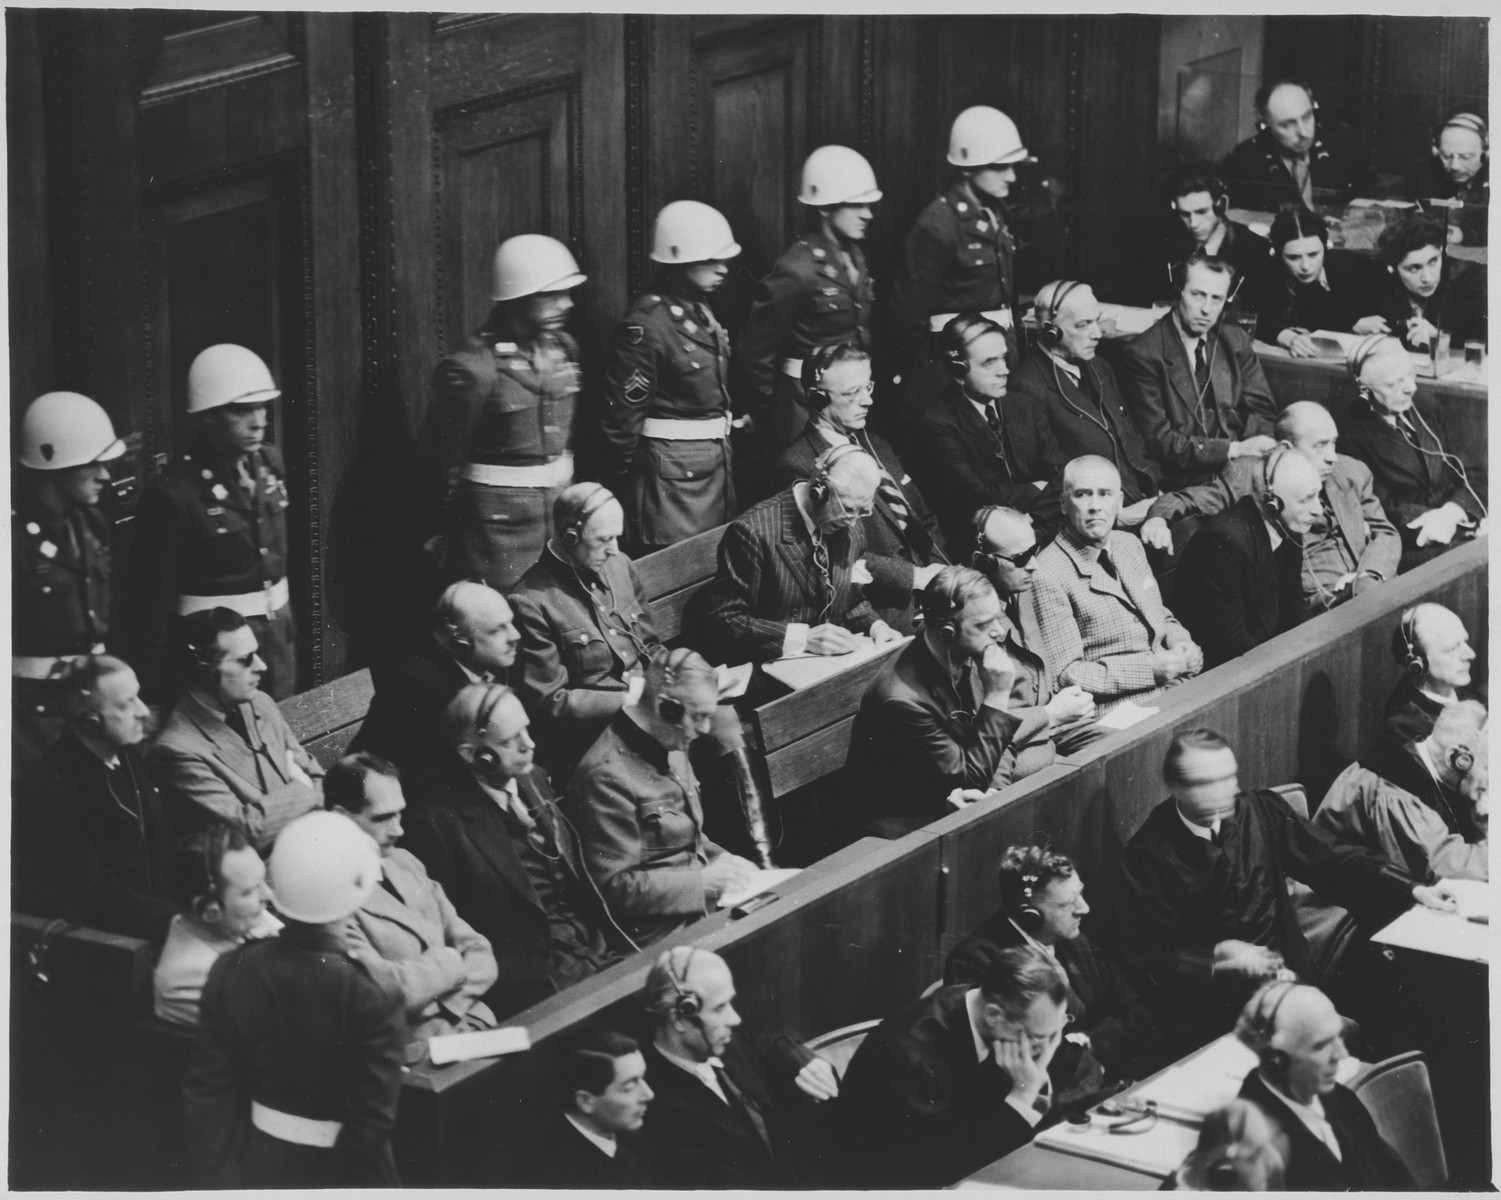 View of the defendants dock at the International Military Tribunal trial of war criminals at Nuremberg.

Seated in front of the defendants are the translators.  Mr. Walter Seligson, translation supervisor (a German Jew owho immigrated first to Palestine and then to the United States) is seated fourth from the left.